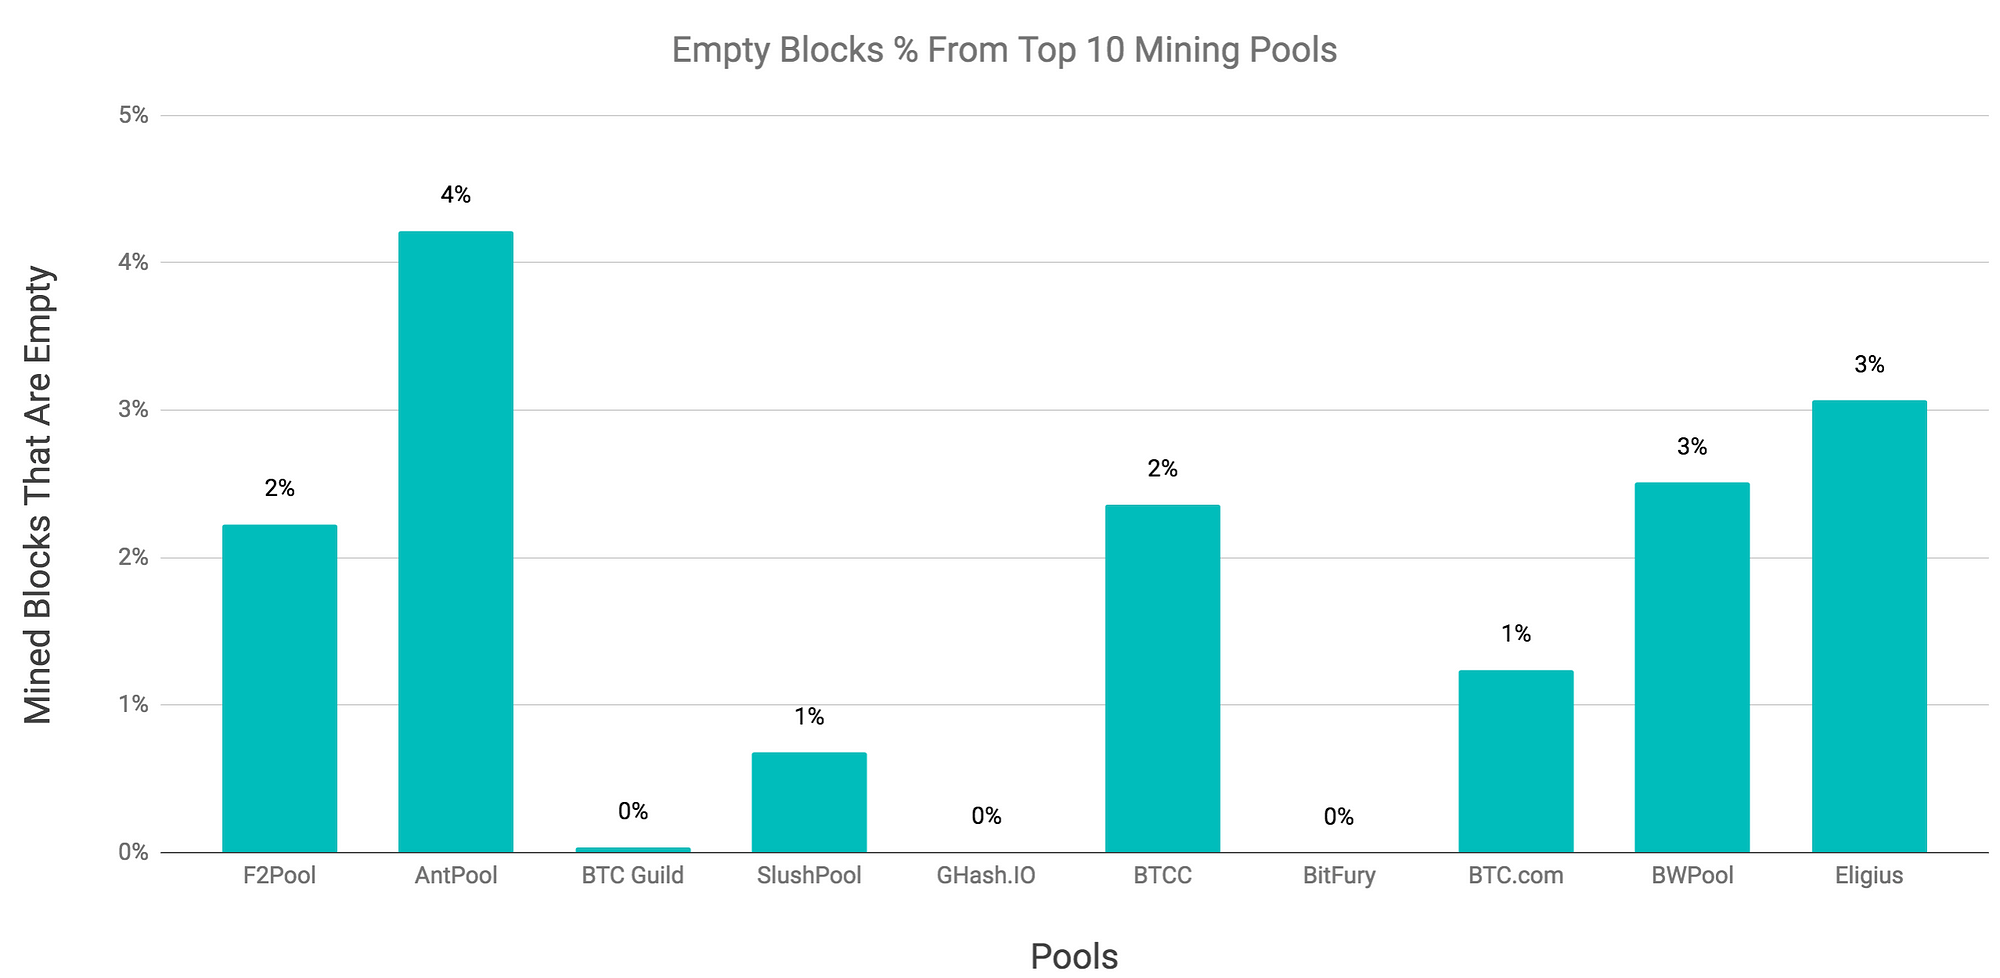 Bitmain is losing dominance in BTC mining as BTC prices have fallen